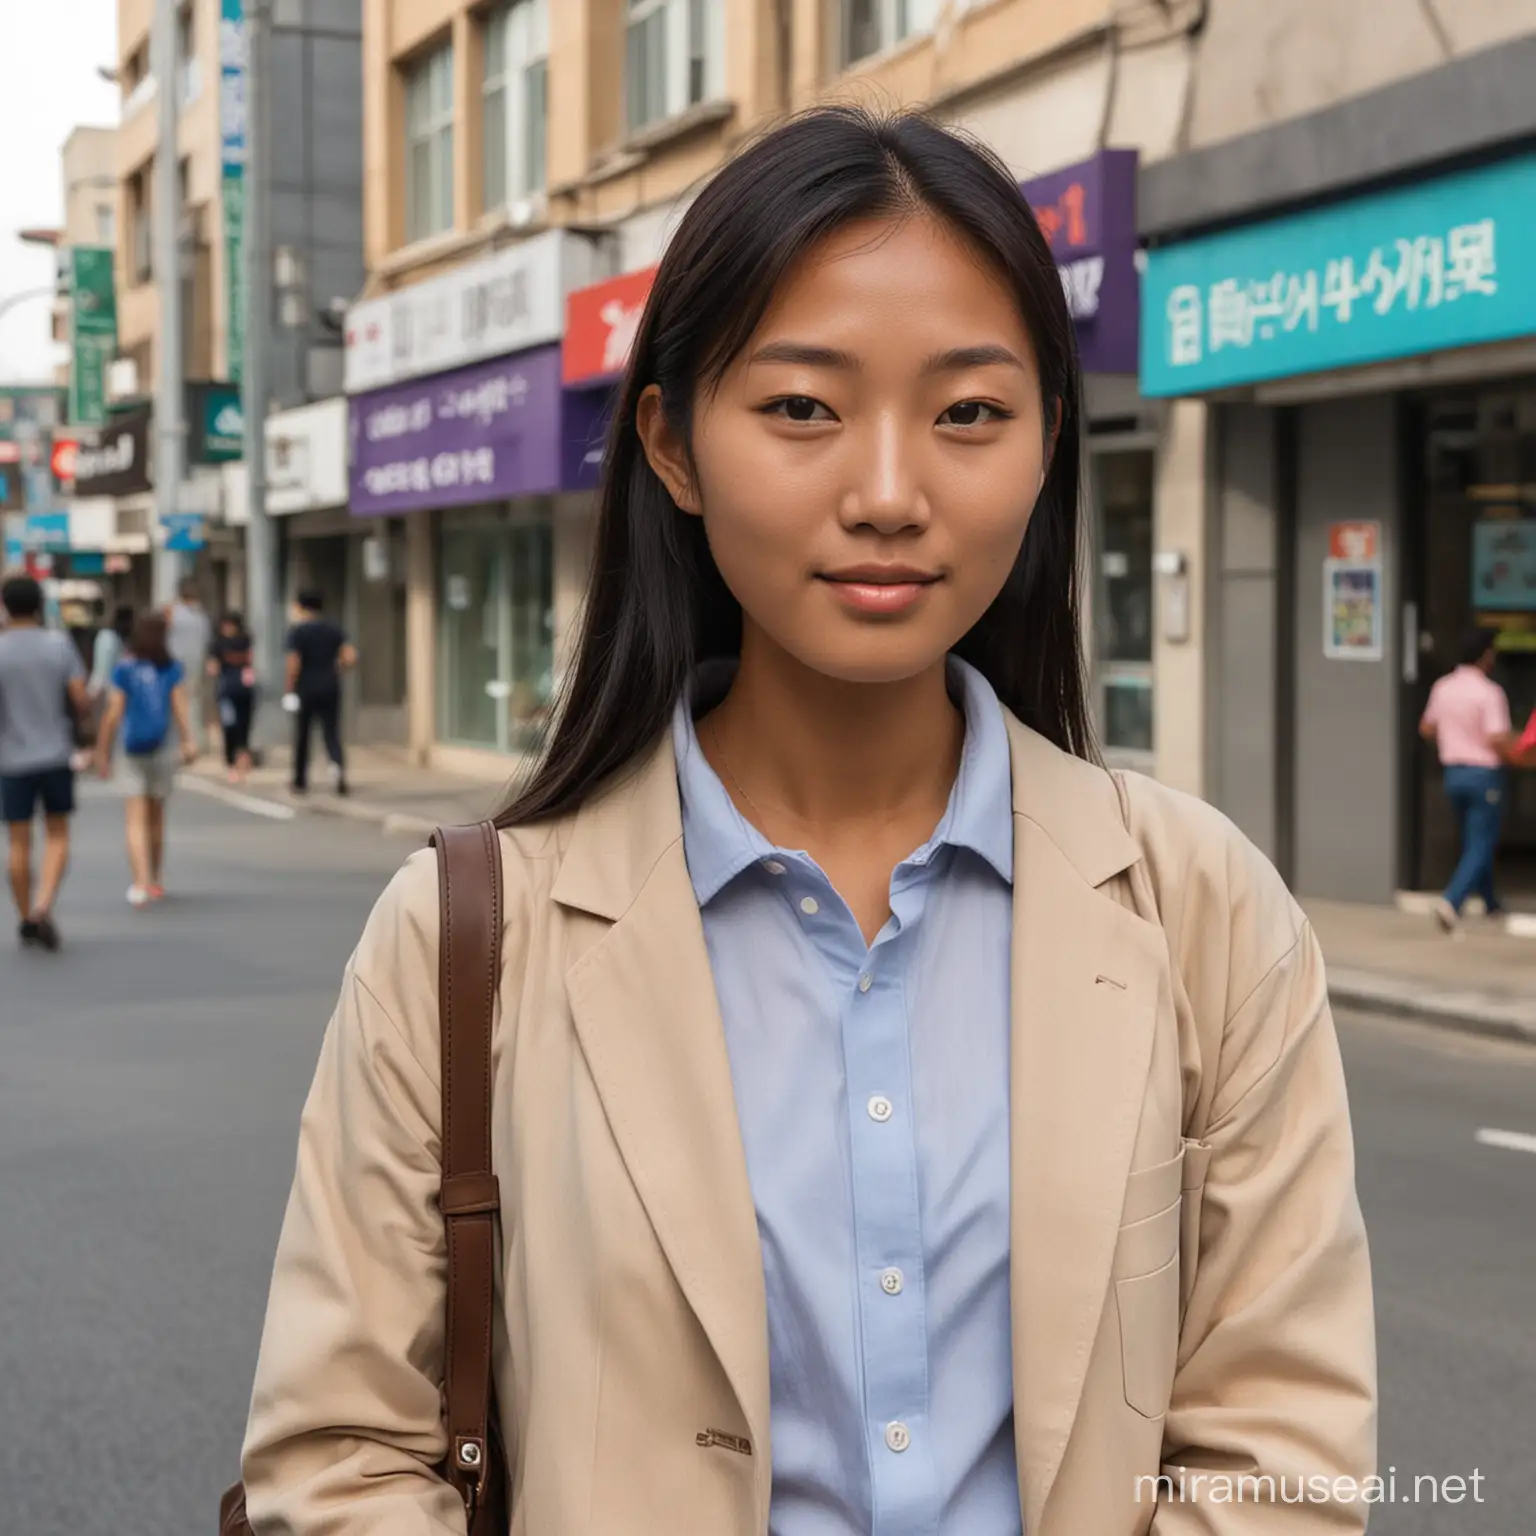 a tanned Korean woman in her 10s, on the street, in school clothes